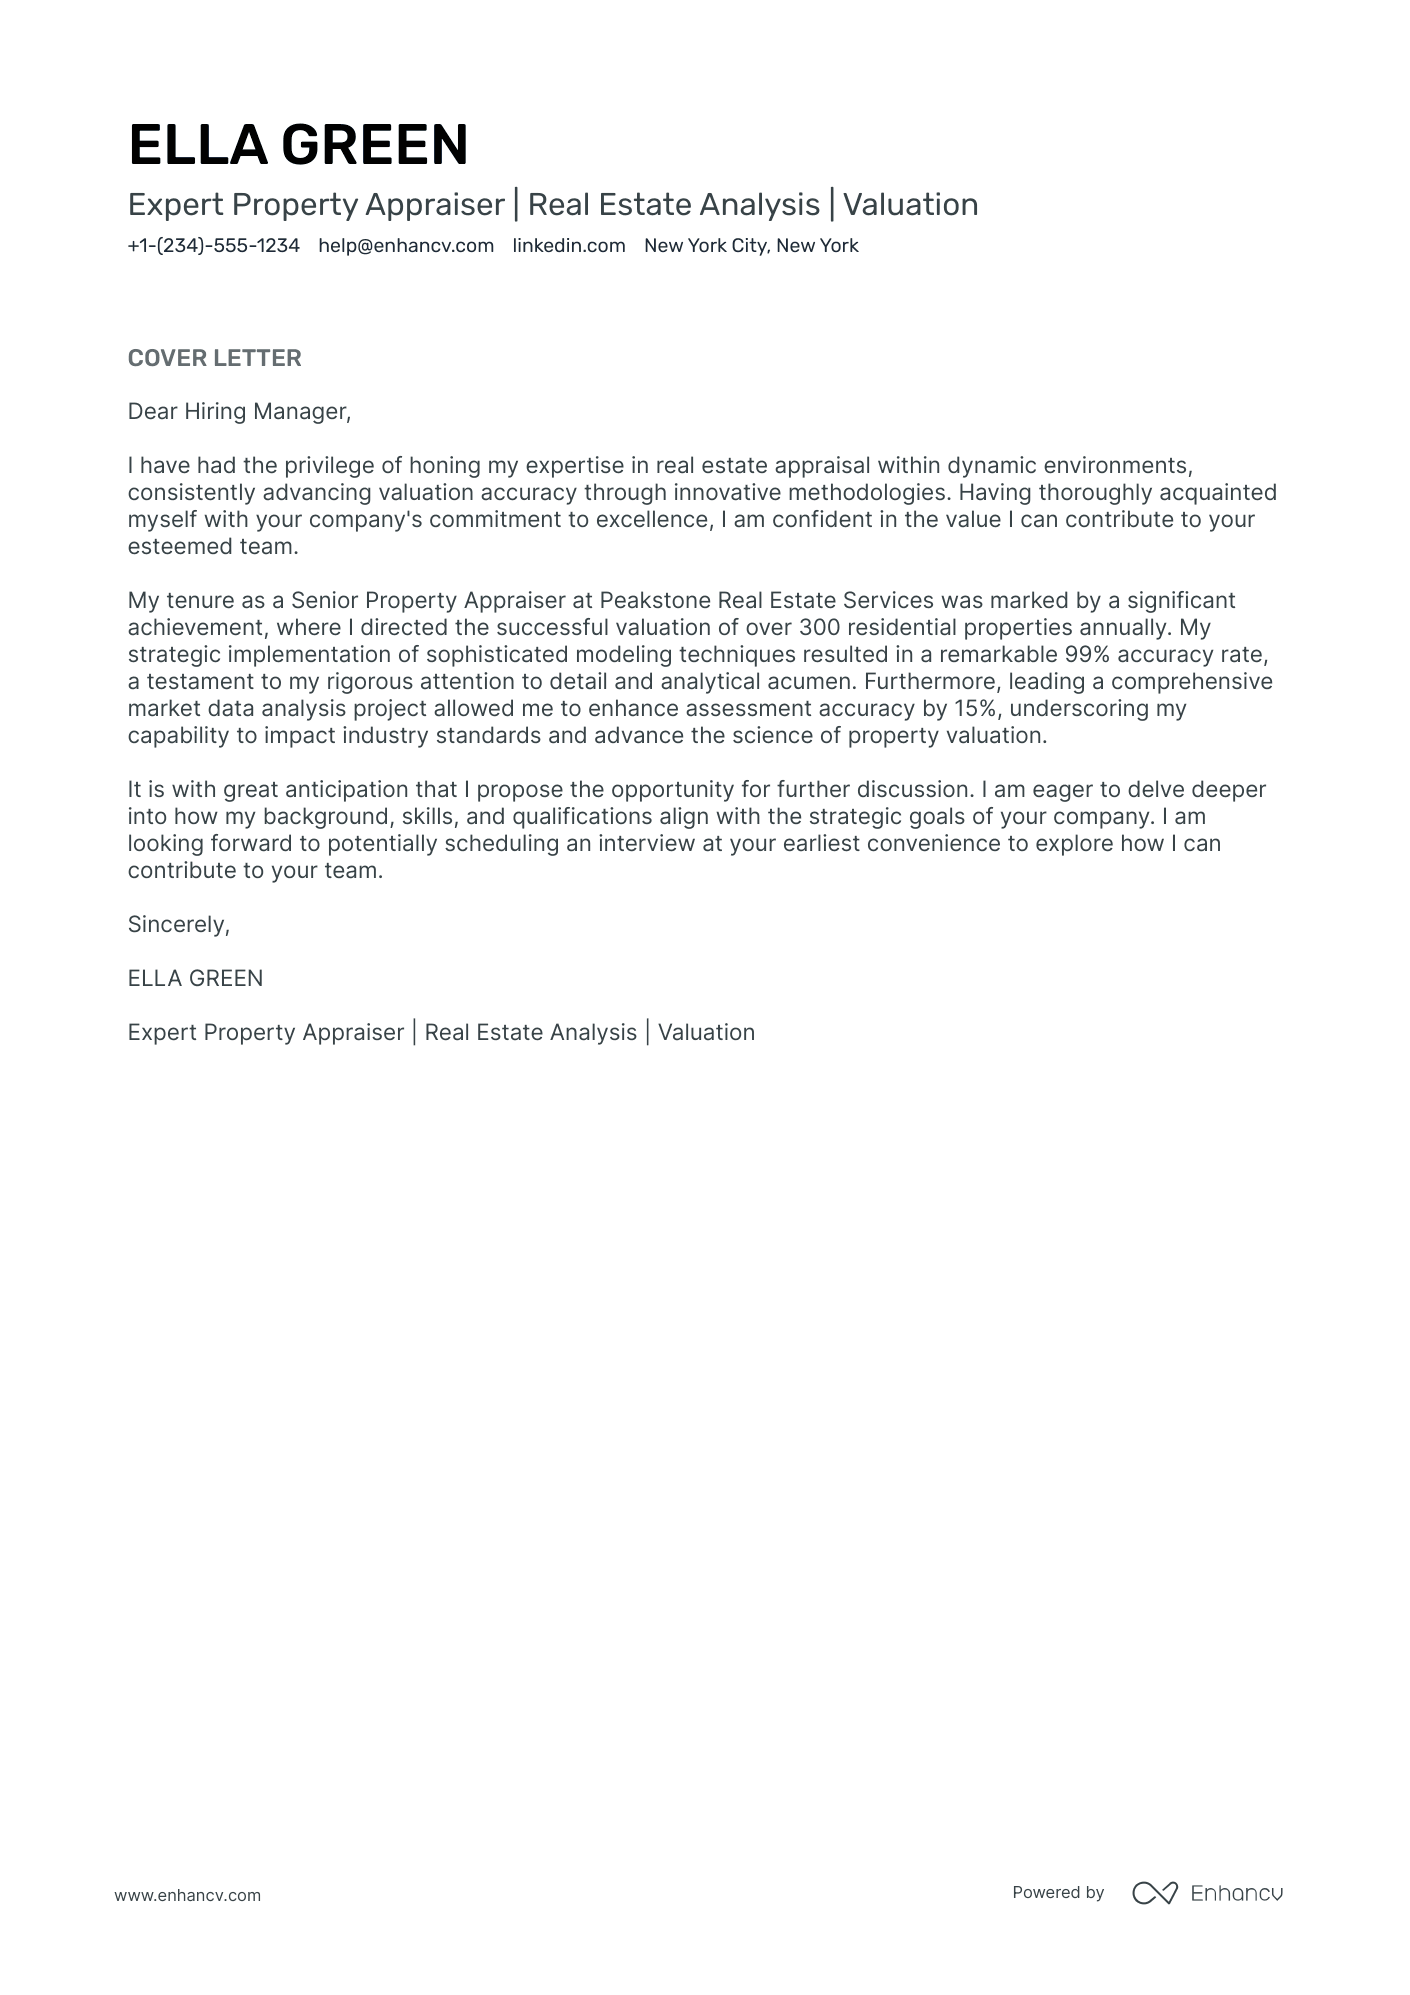 cover letter for accounts payable